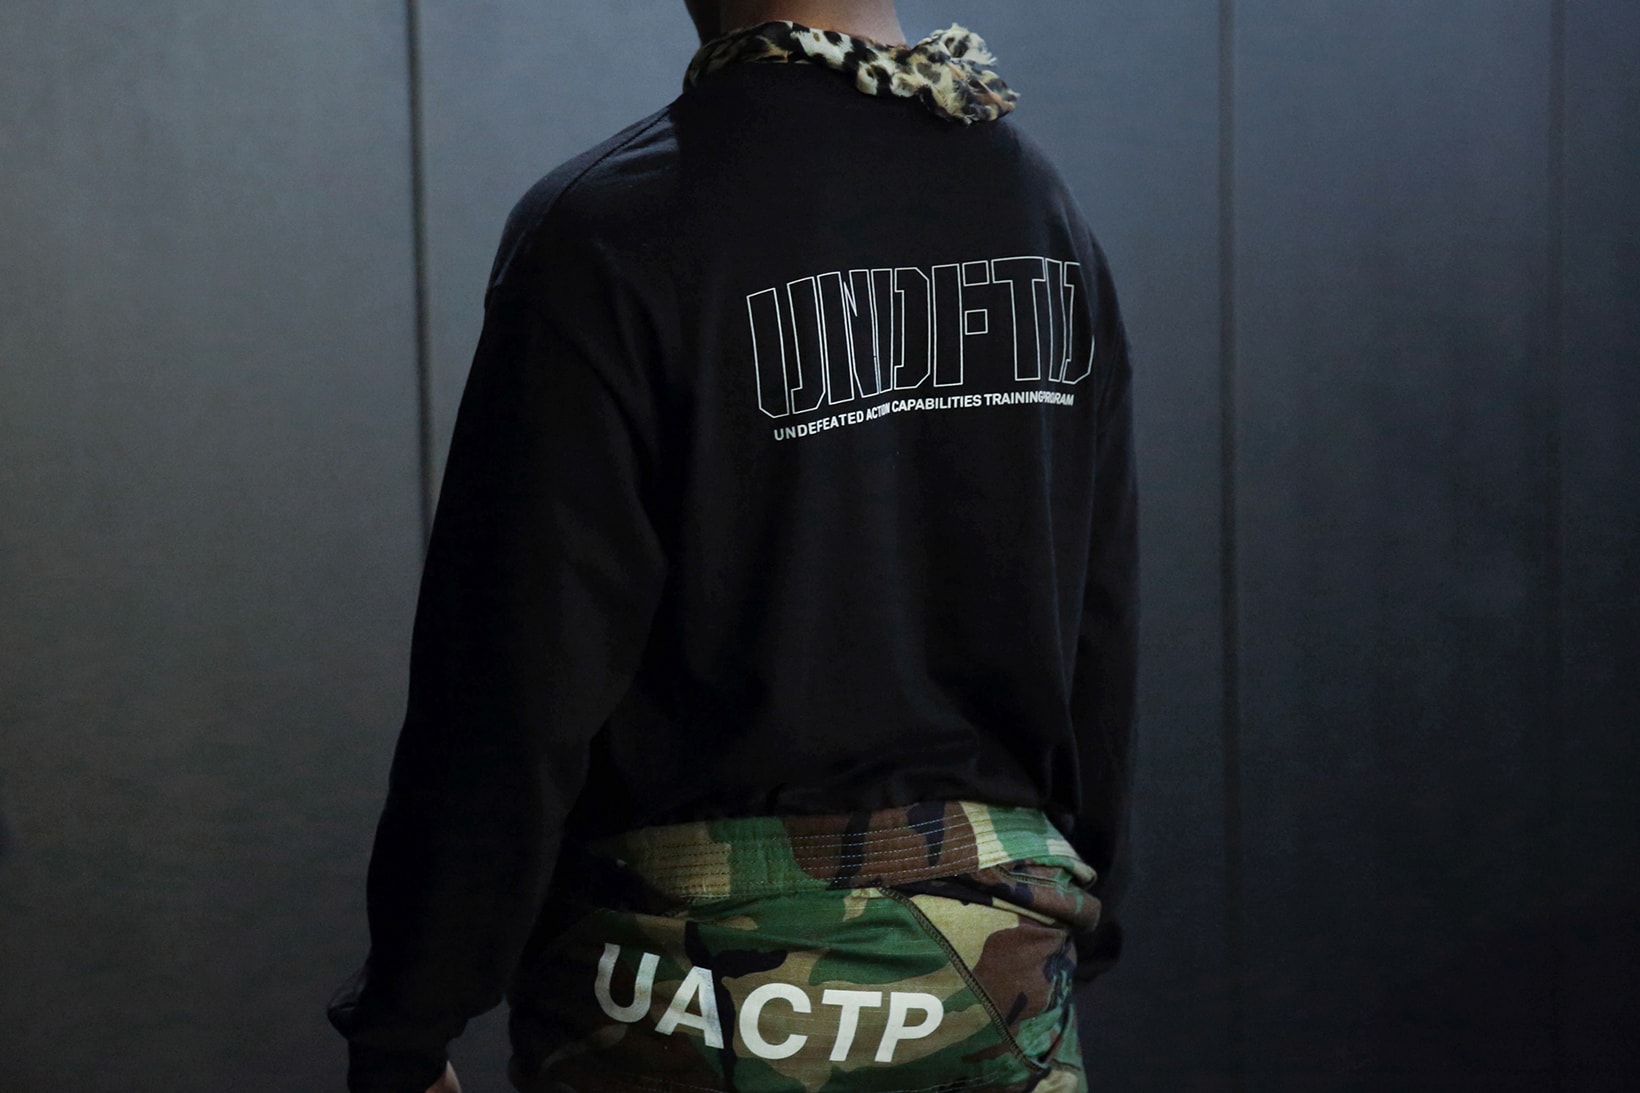 UNDEFEATED DualForces Kimono Gi Capsule Collection 2017 July Release Date Info